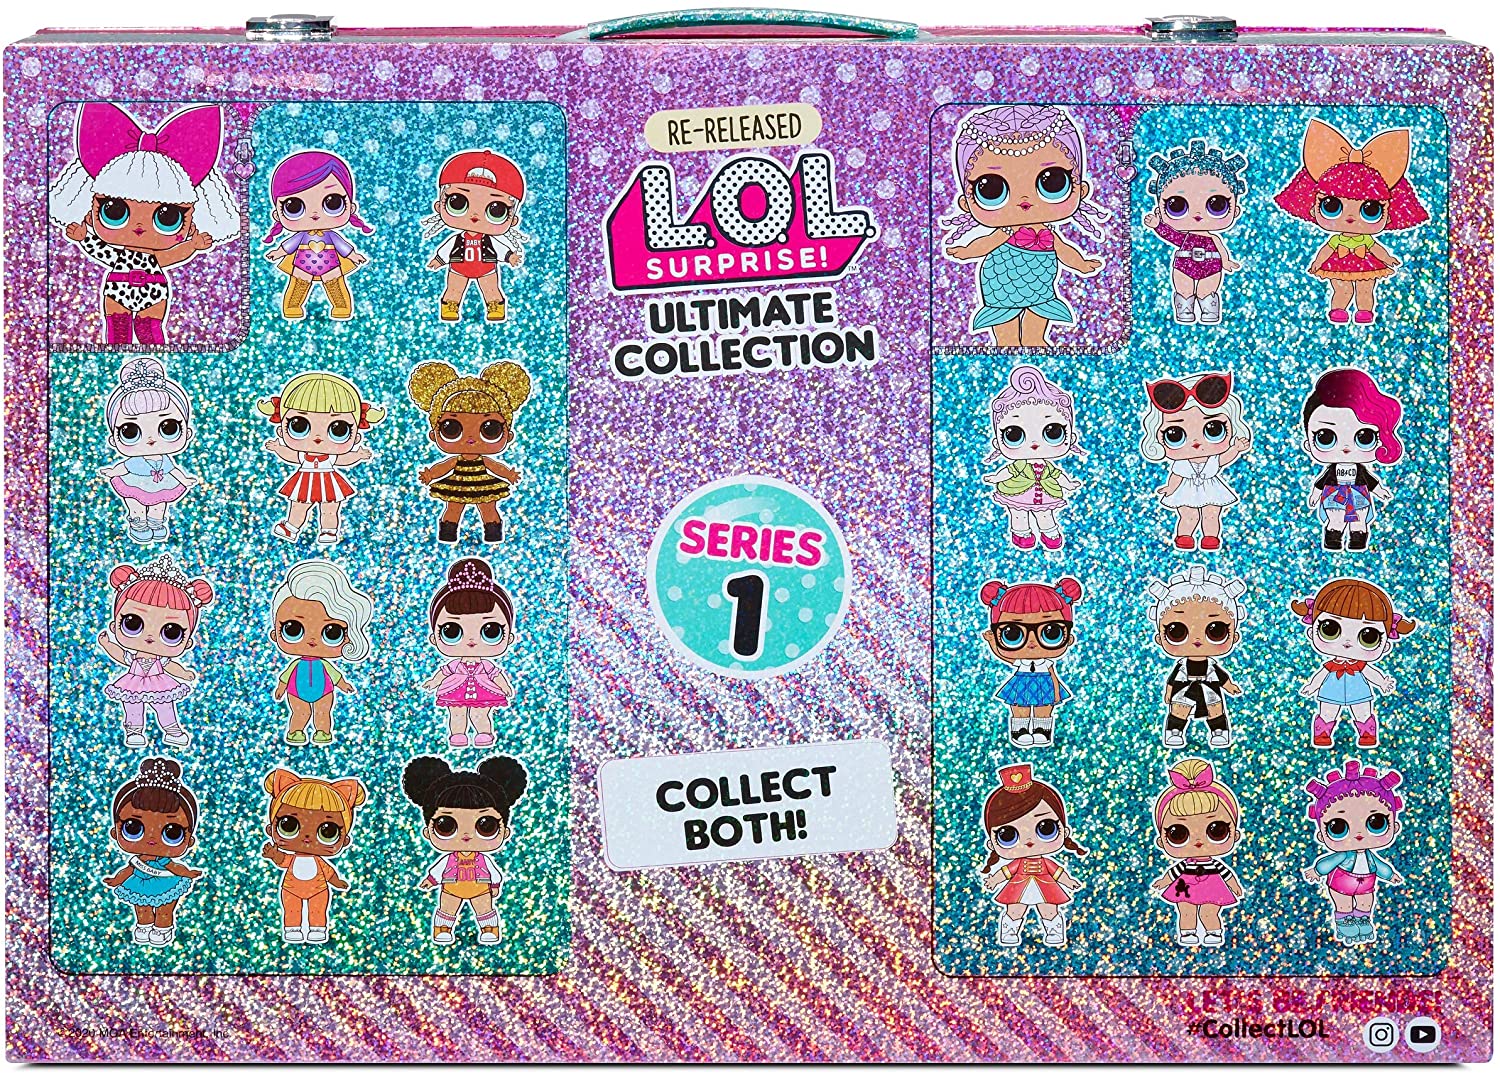 Lol Surprise Series 1 Ultimate Collection Re Release Diva 12 Pack Is Available Now